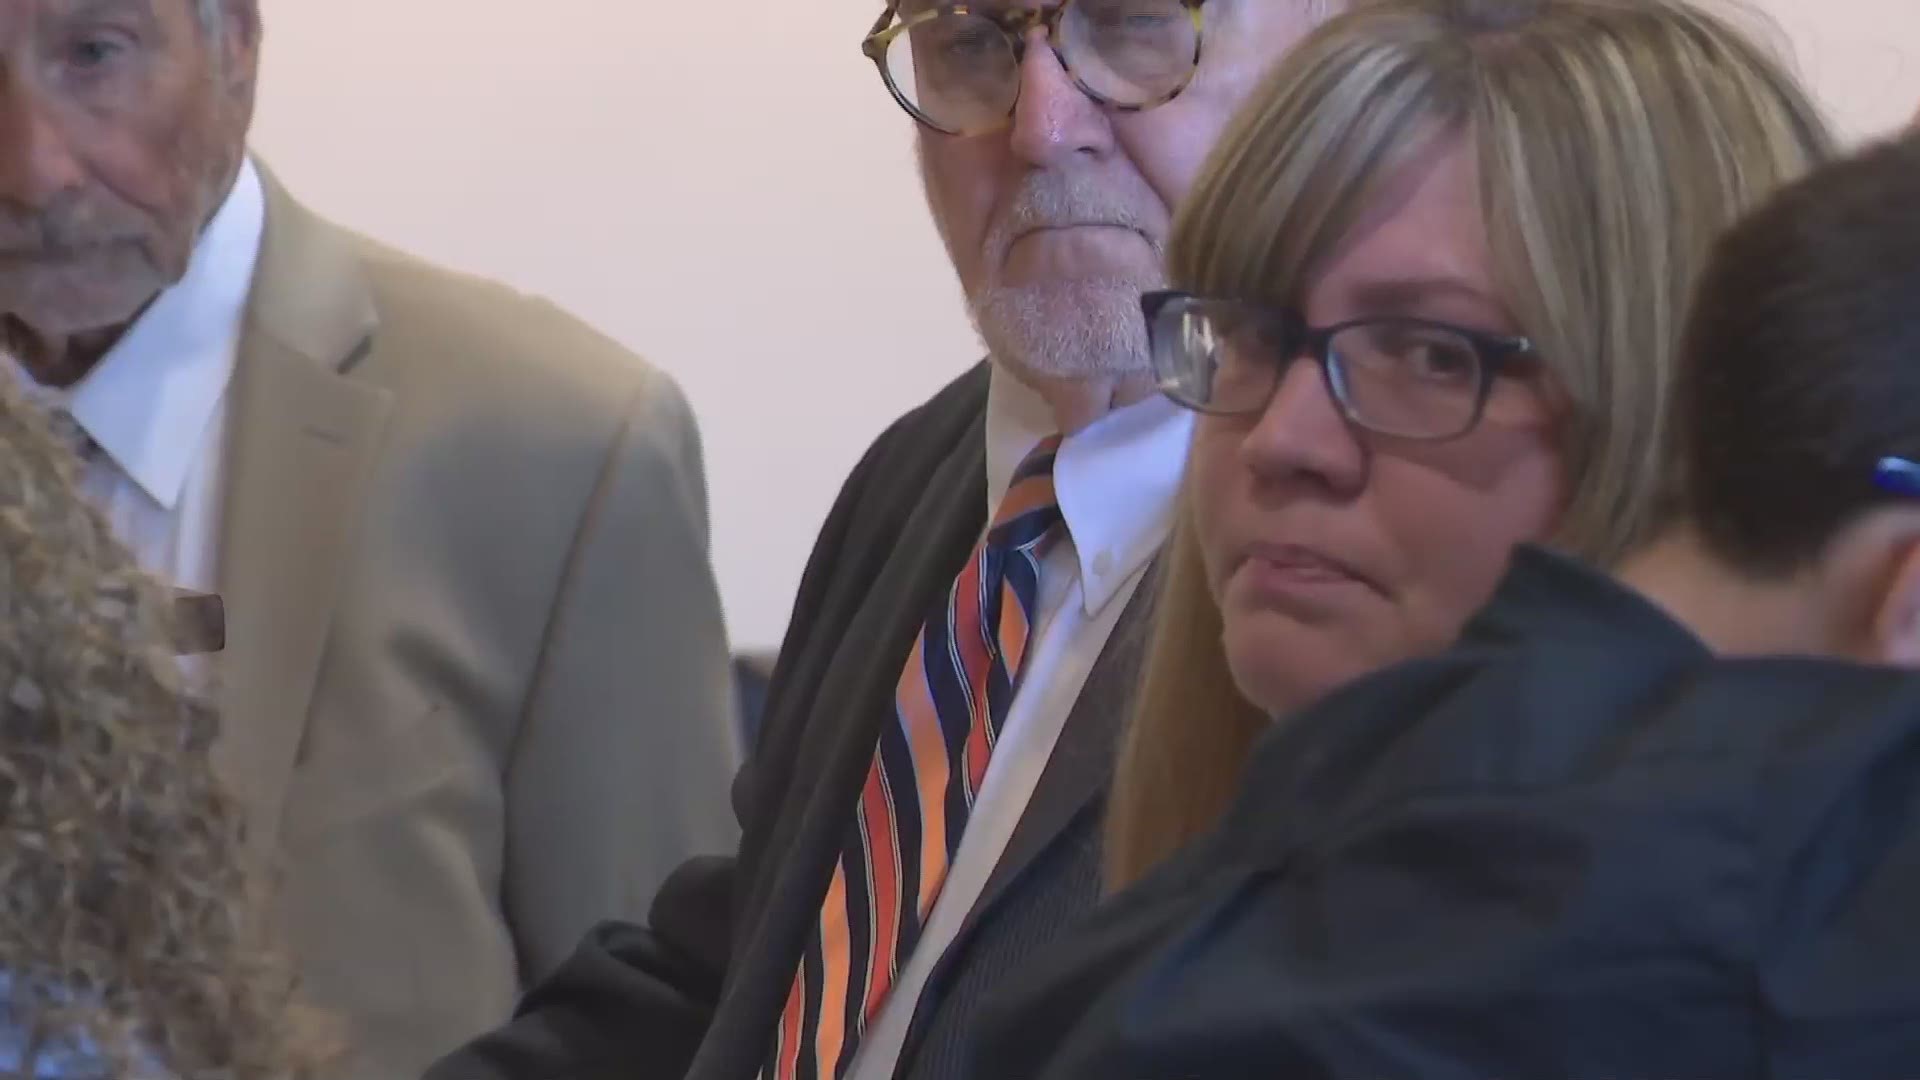 July 18, 2019: 'She needs to know that this is a mother’s worst nightmare. This was my nightmare.' Those were the tearful words of a mother who was in court to witness the change of plea hearing for the driver who struck her son as he got off a school bus in Willowick.